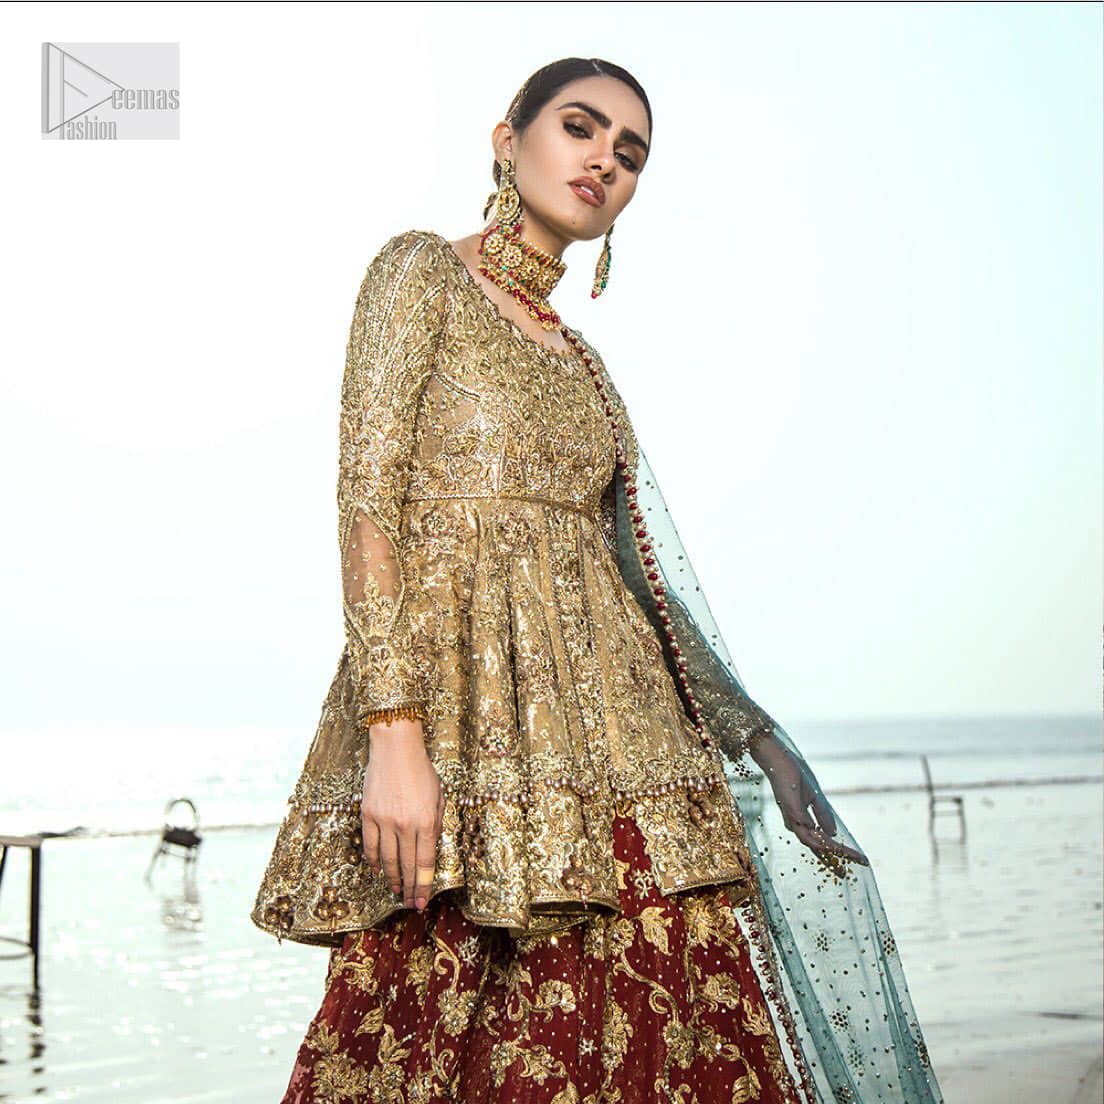 This wedding season, create a blissful aura with the treasure of love and elegance. An artistic vision of classic style and luxurious detailing infused with a bohemian spirit, transpire into a truly romantic and iconic bridal for your big day. The golden double layered peplum is heavily laden with zardozi and the perfect blend of traditional flamboyance and modern elegance in design. Pair it up with maroon lehenga enhanced with golden zardozi work. To complete the look, go with teel dupatta scattered with sequins all over the ground and heavily embellished borders to give it a perfect maharani look.